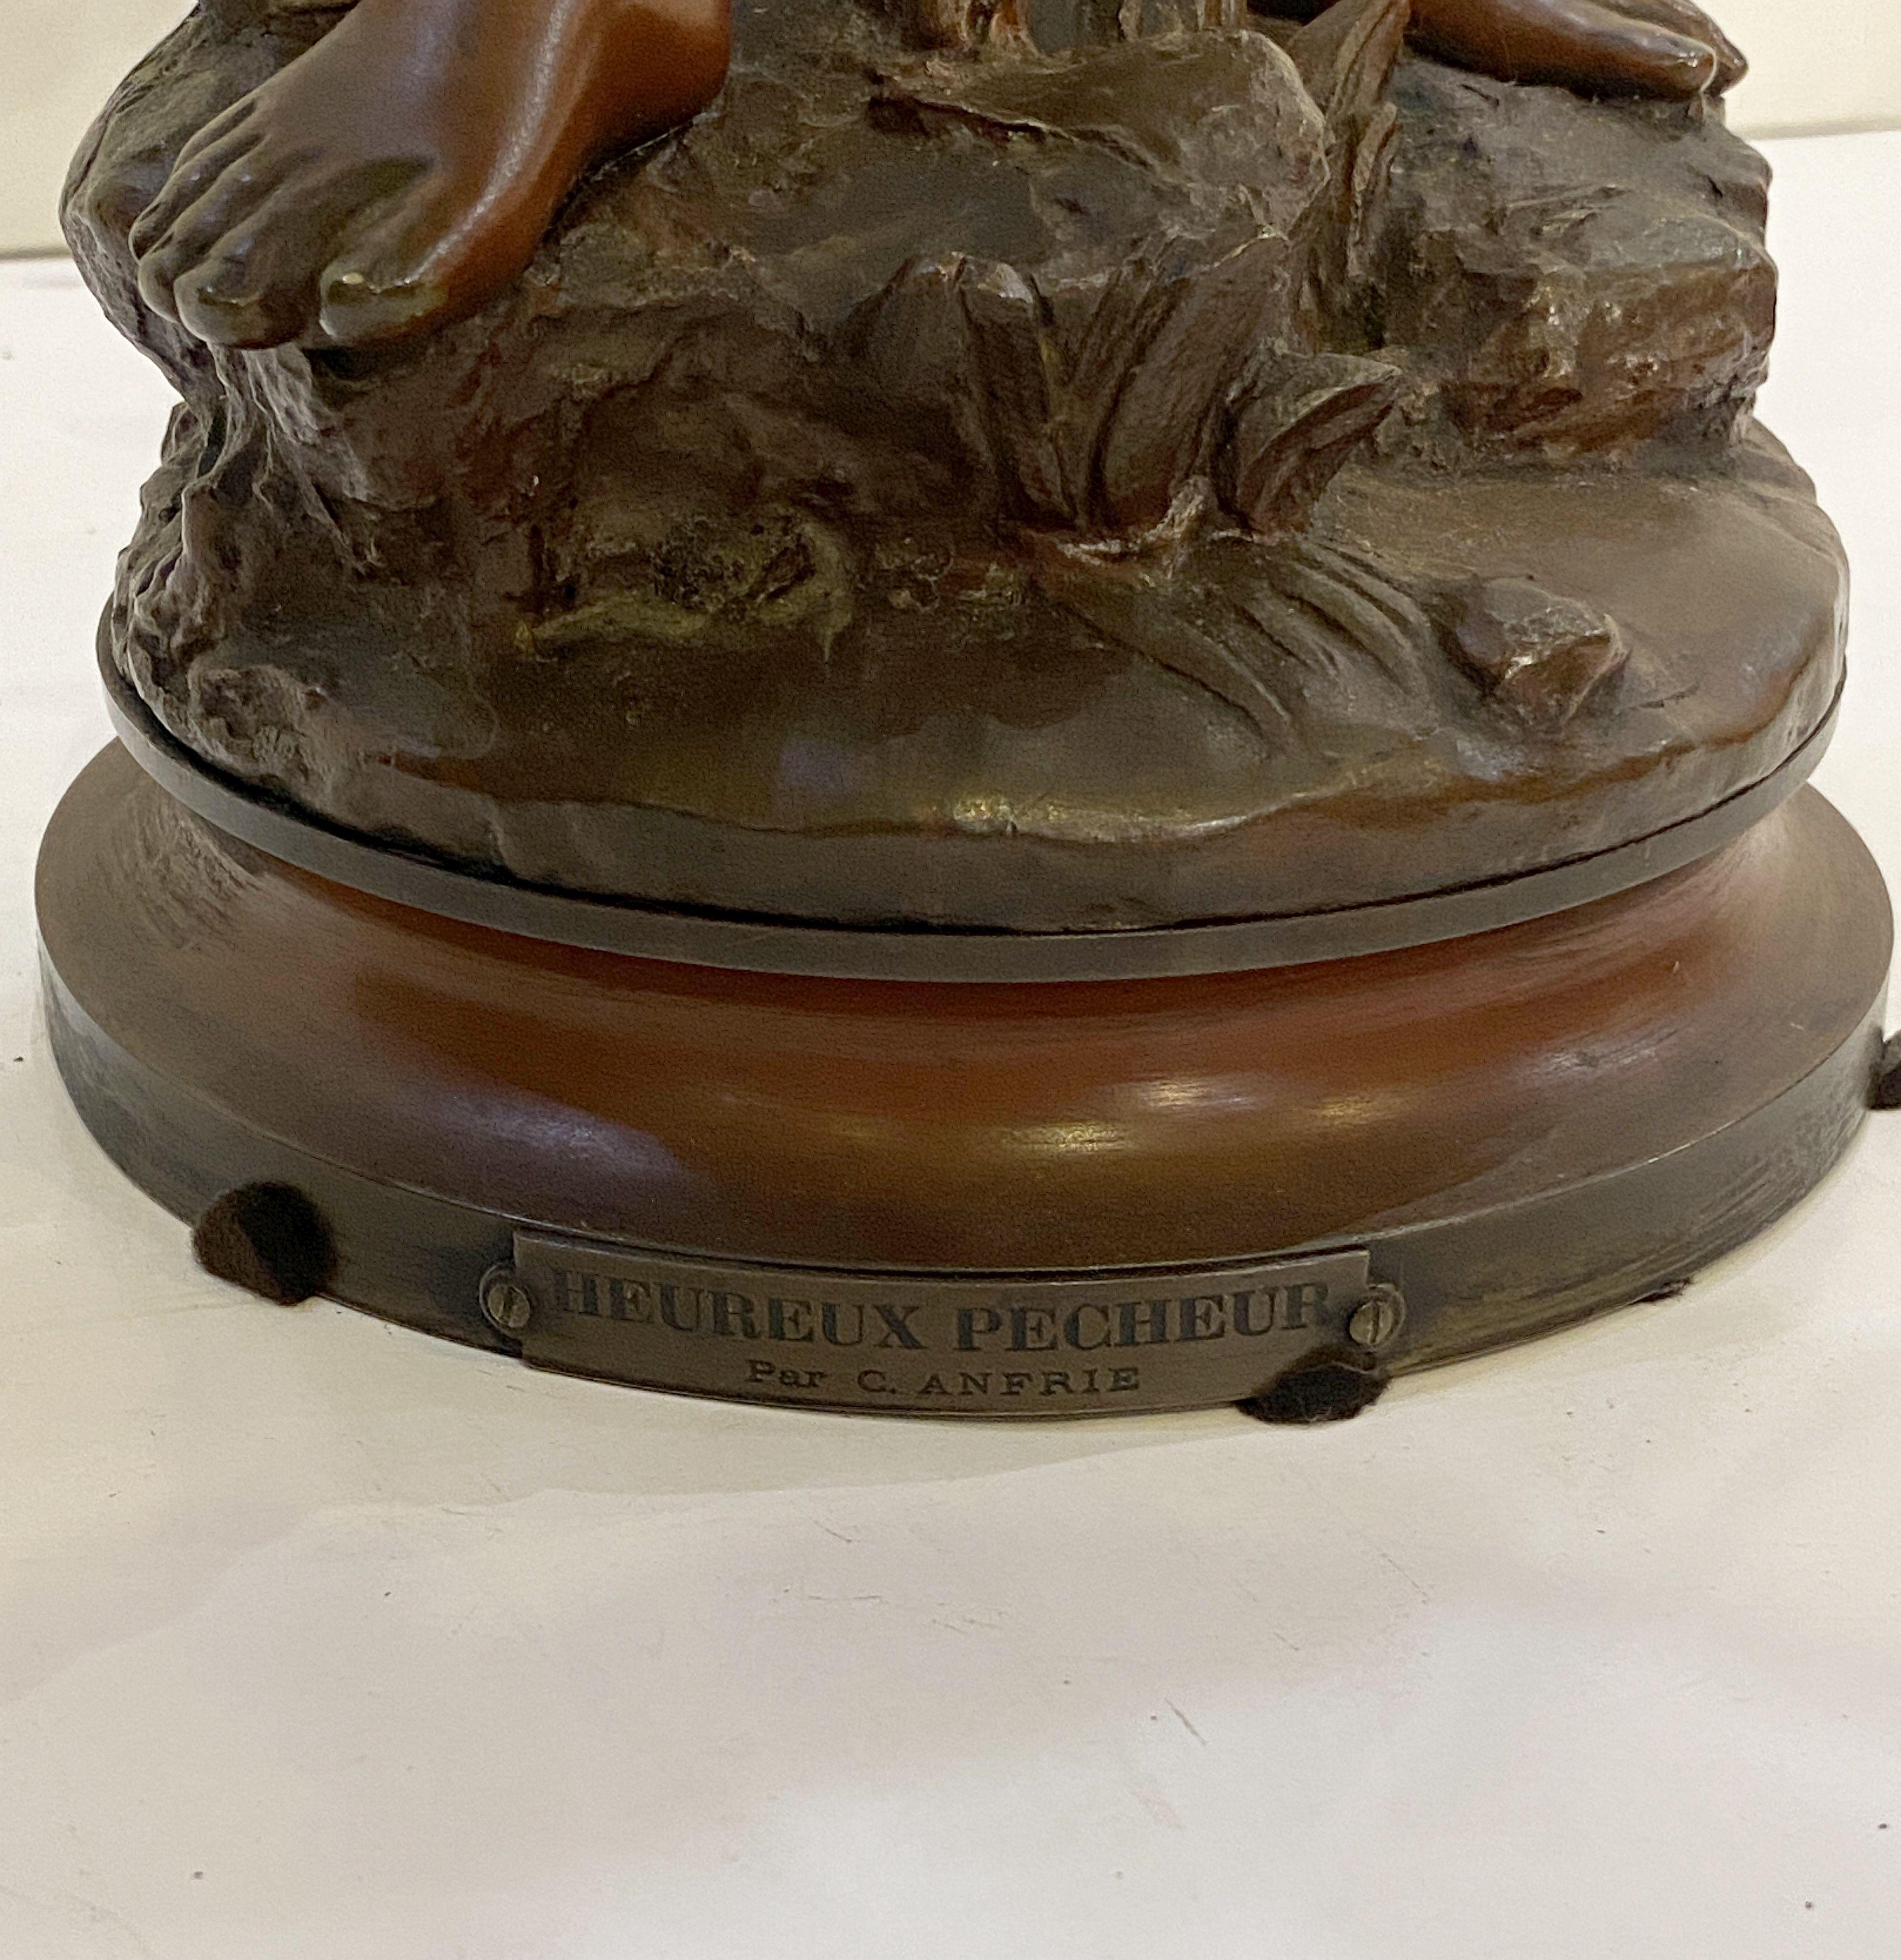 Heureux Pêcheur or Happy Fisherboy Bronze Sculptural Figure by Charles Anfrie  11